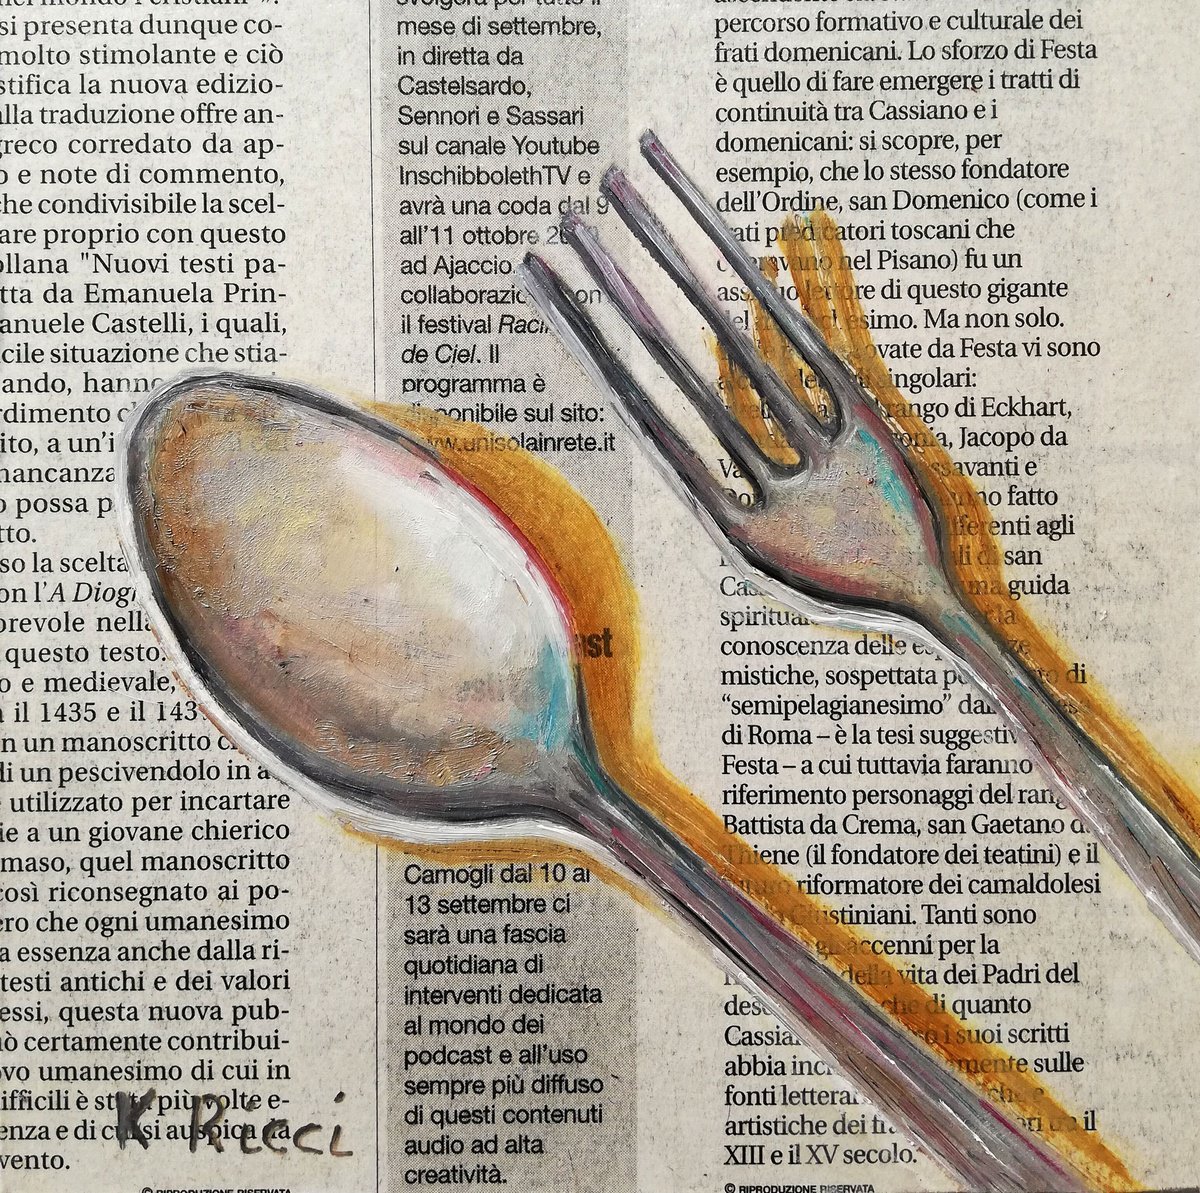 Fork and Spoon on Newspaper Original Oil on Wooden Board Painting 6 by 6(15x15cm) by Katia Ricci